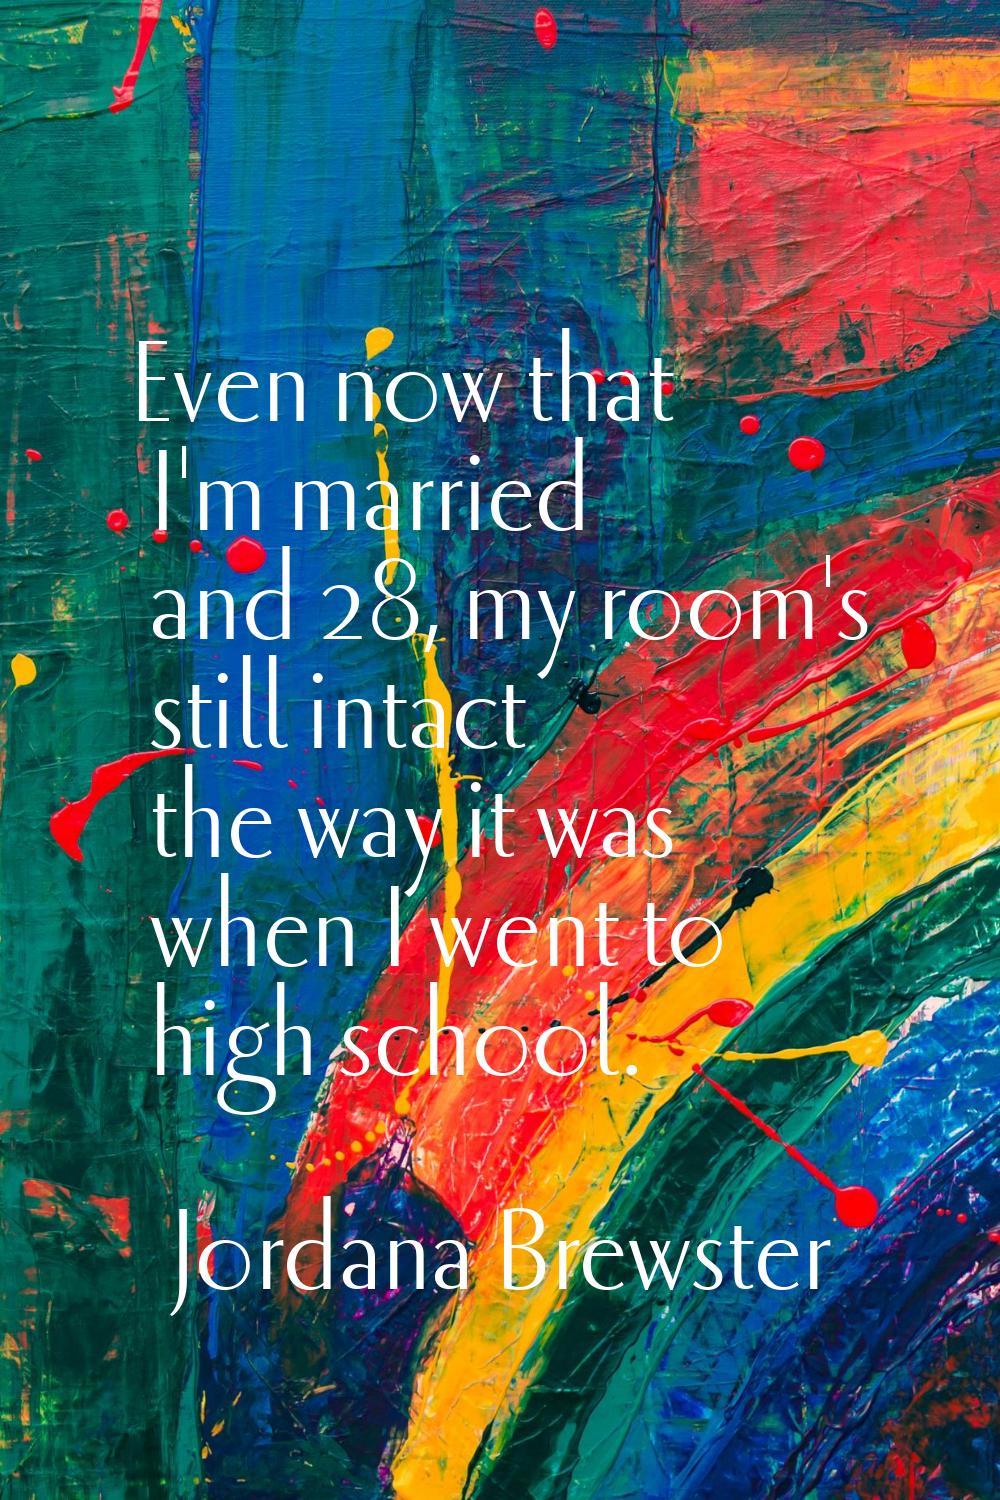 Even now that I'm married and 28, my room's still intact the way it was when I went to high school.